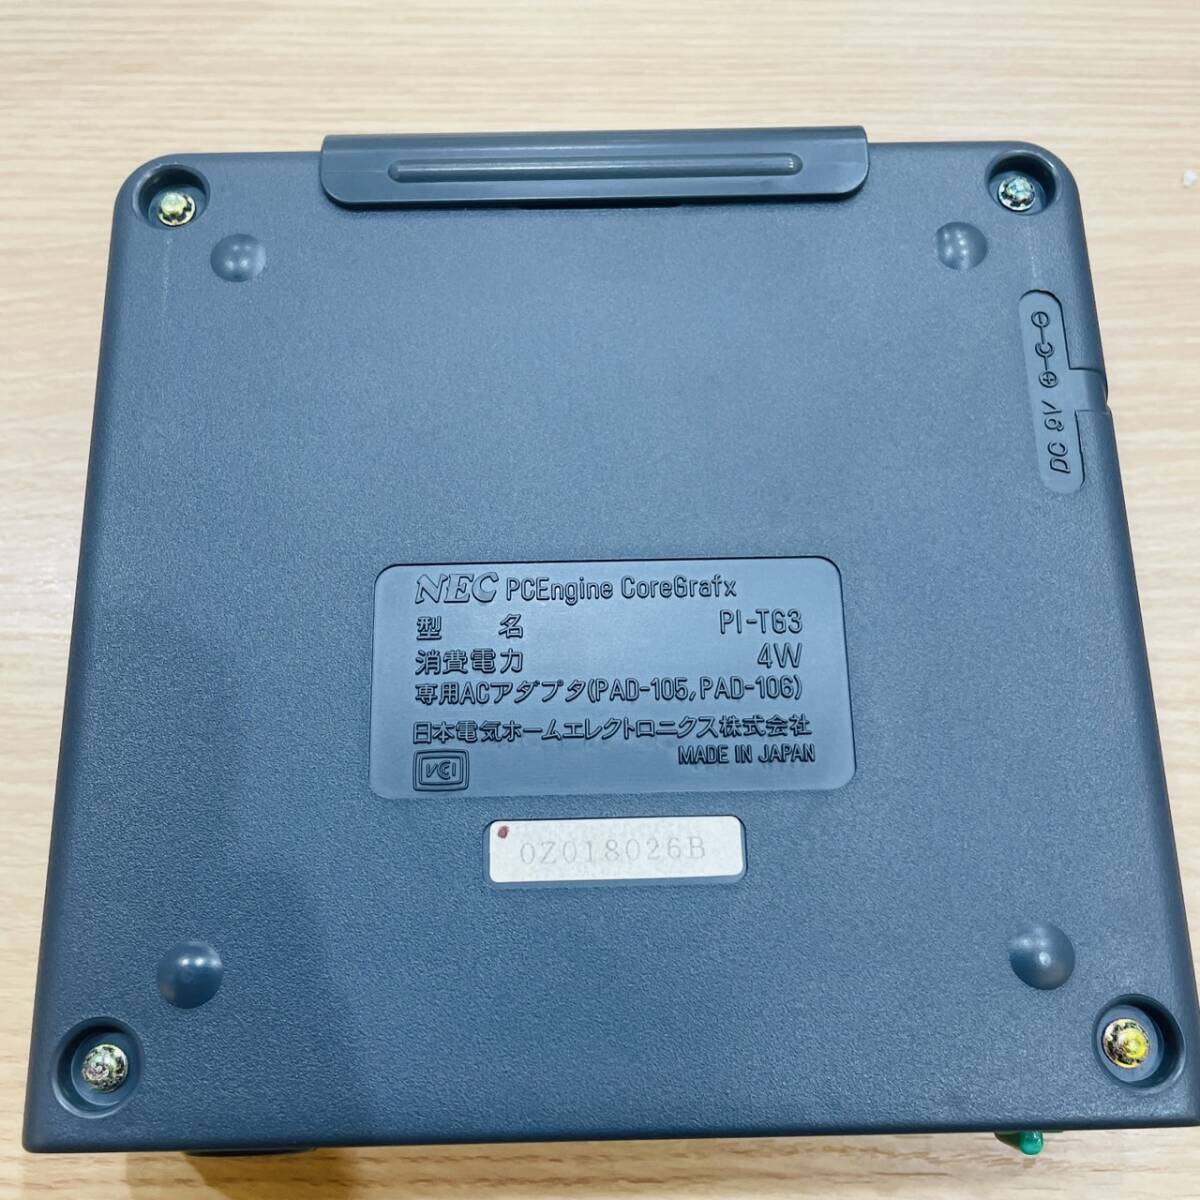 [H11293OR] 1 jpy ~ NEC PCEngine CoreGrafx PI-TG3 PC engine core graphics box instructions attaching box dirt equipped electrification not yet verification 